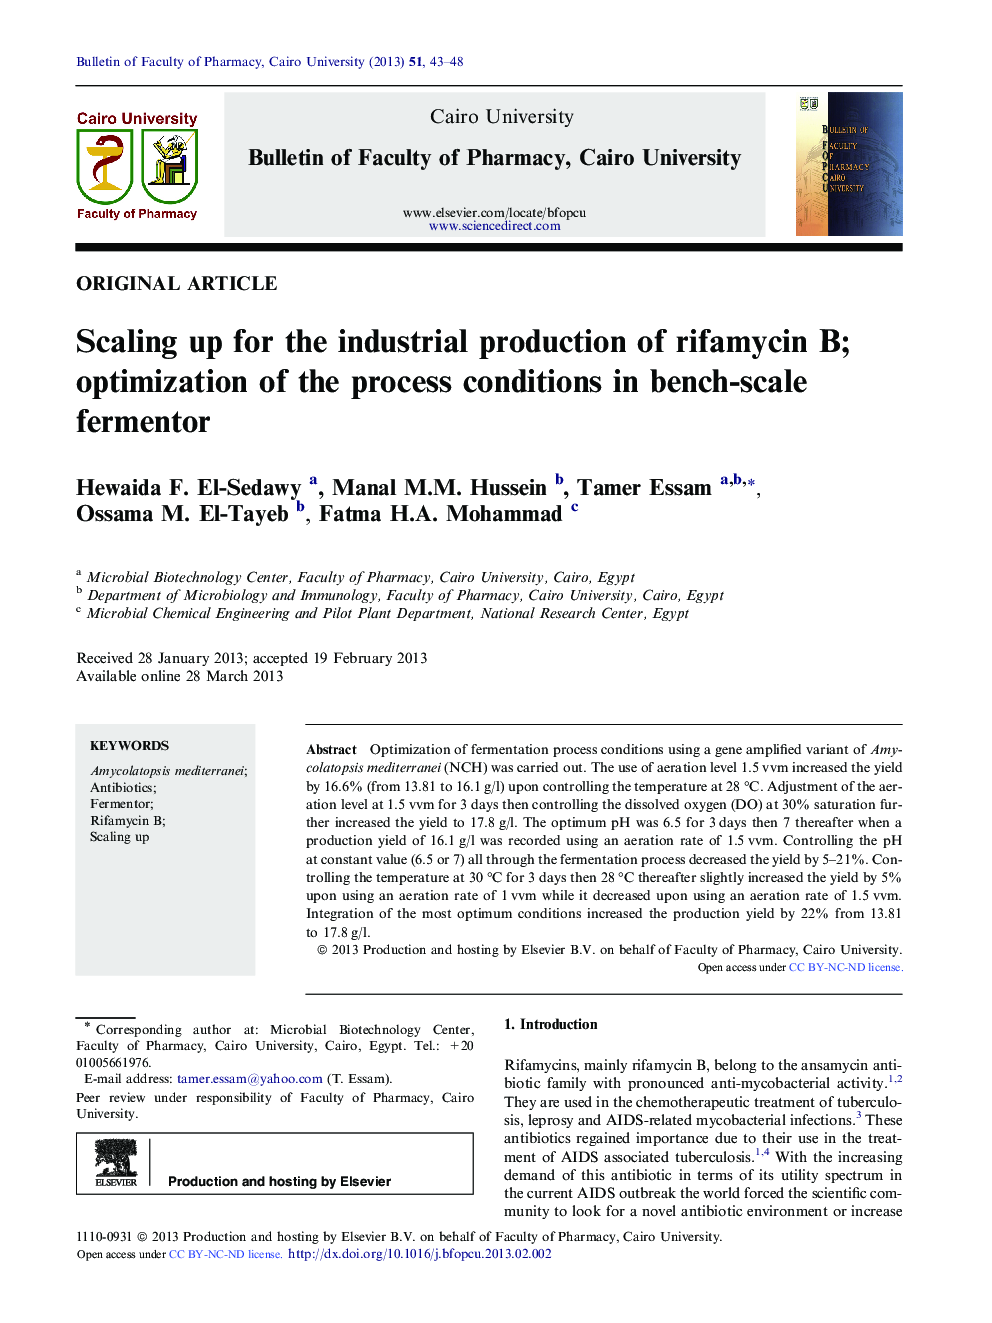 Scaling up for the industrial production of rifamycin B; optimization of the process conditions in bench-scale fermentor 